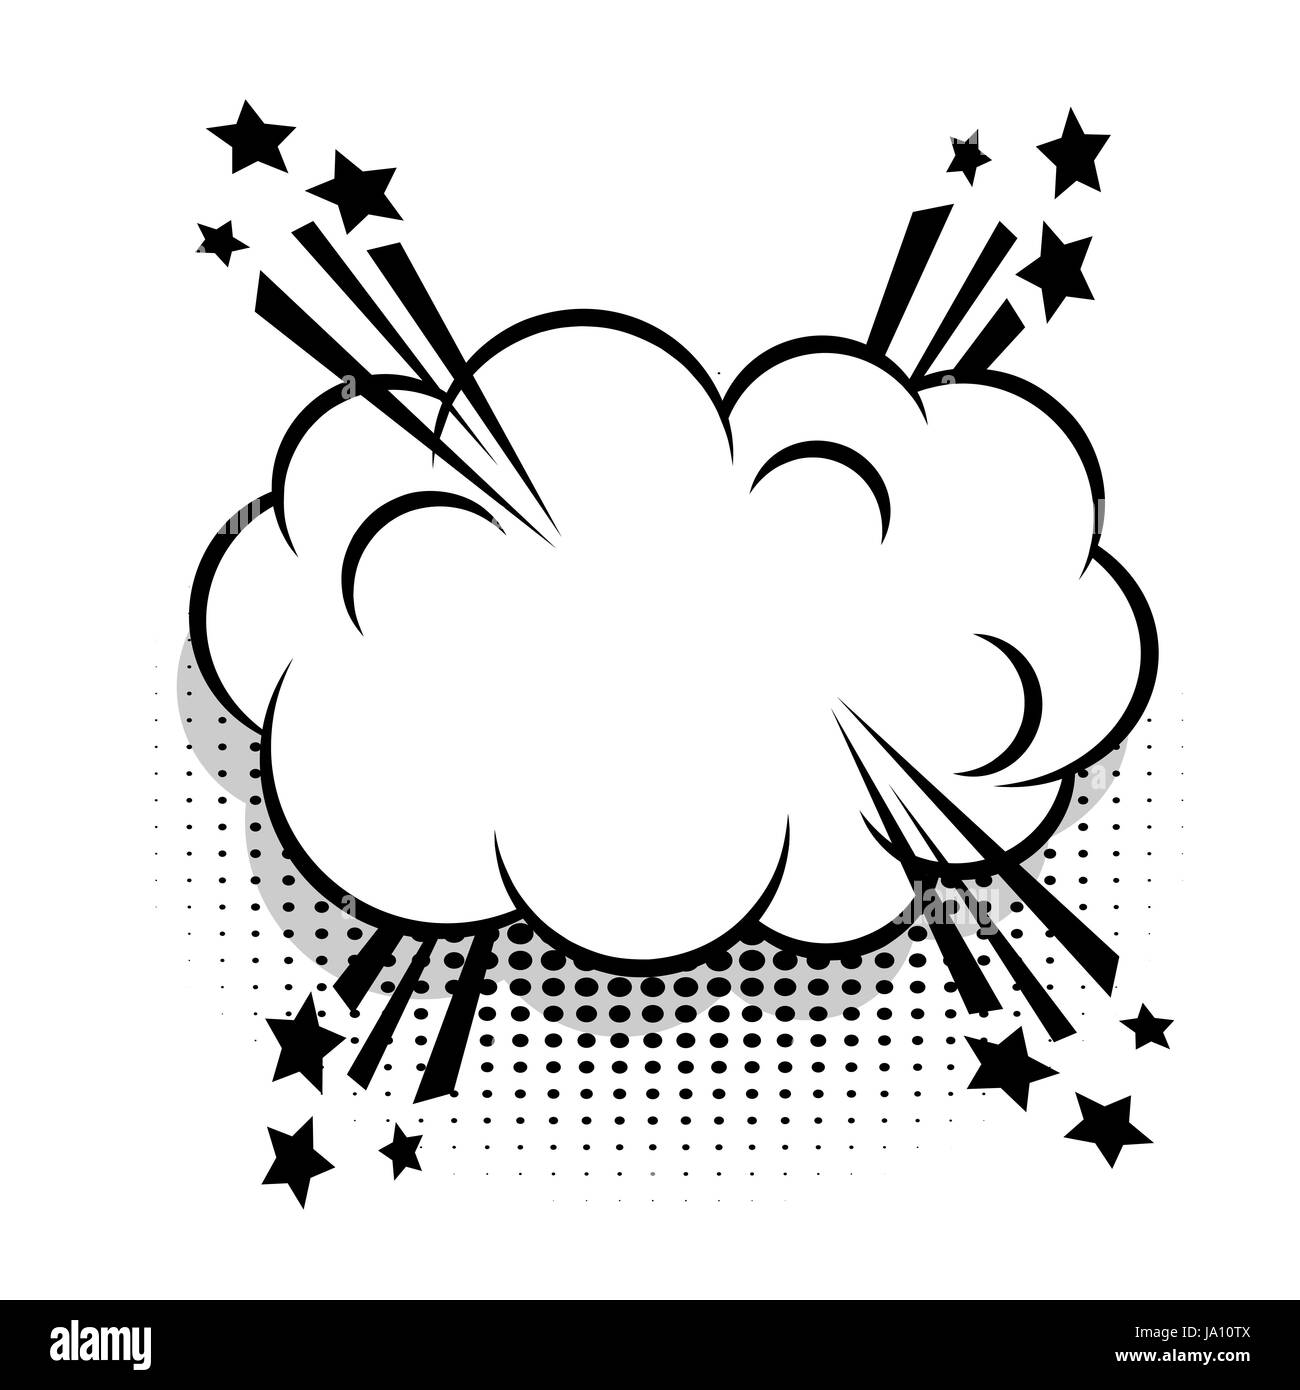 Cloud empty white comic book text balloon pop art. Bubble icon speech phrase. Cartoon funny label tag expression. Sound boom explosion effects. Advert Stock Vector